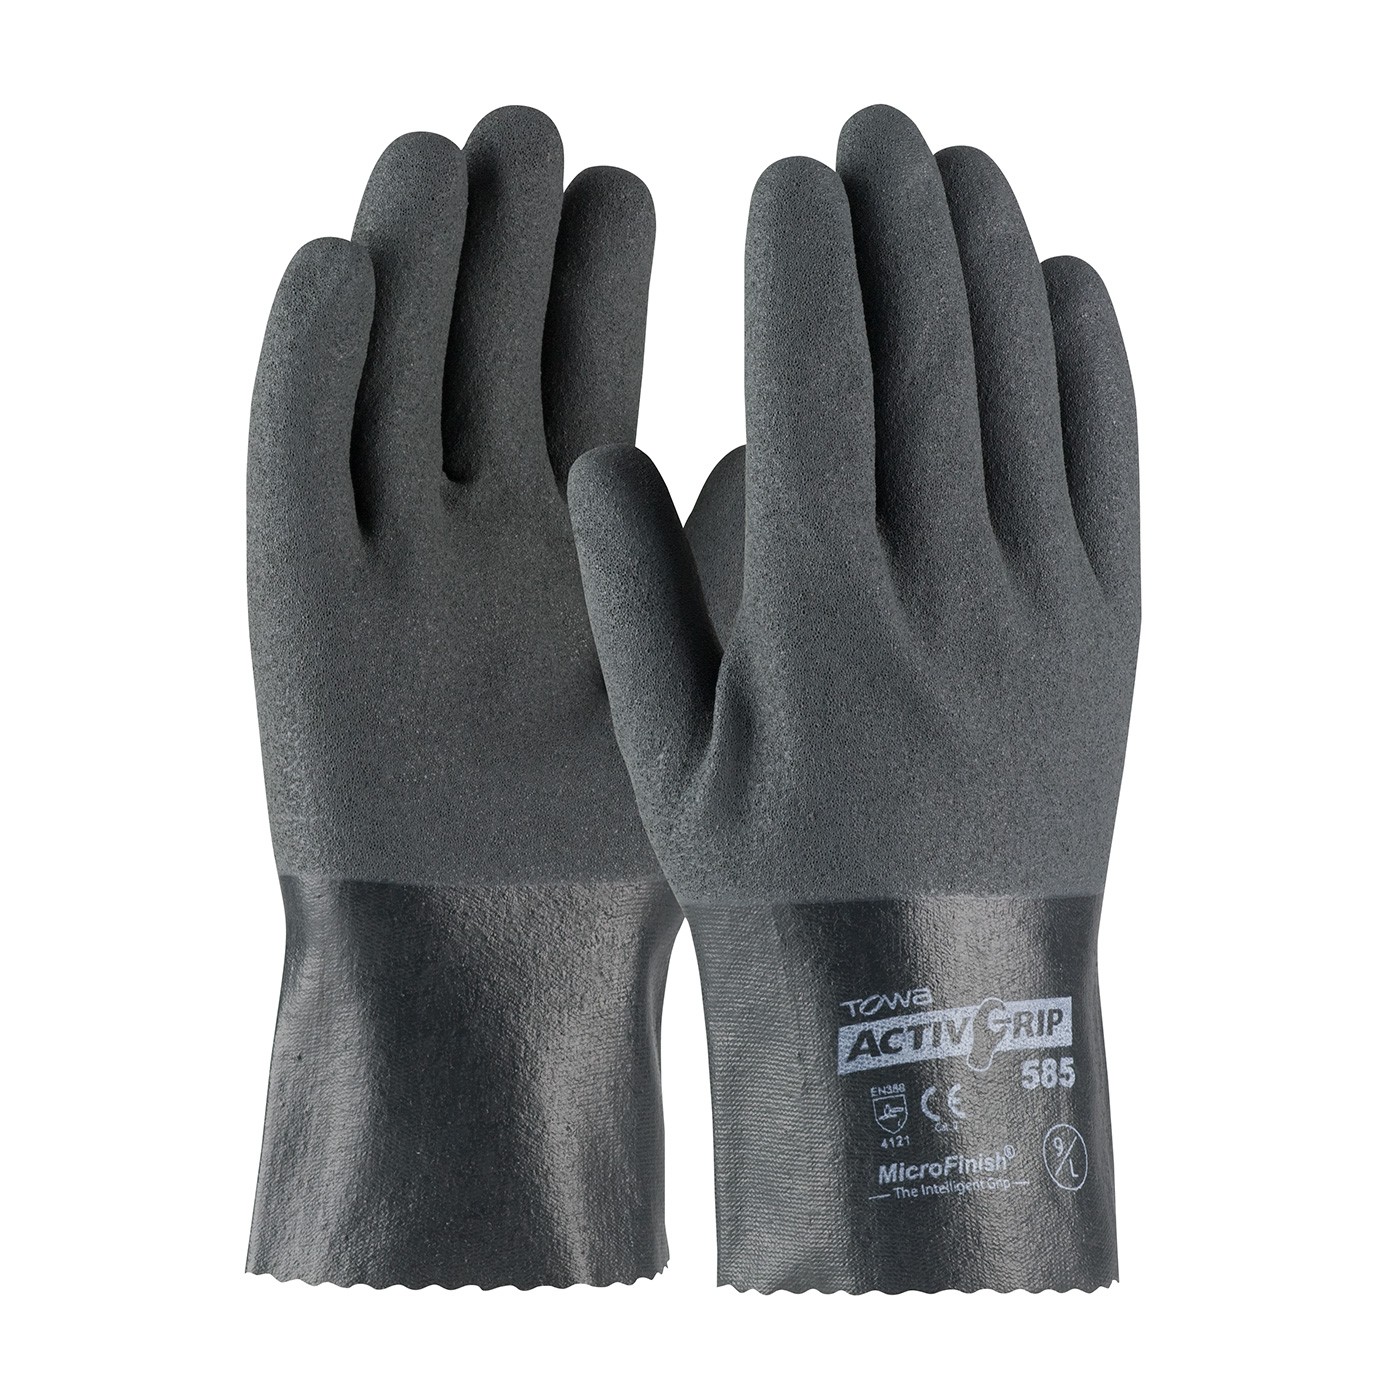 ActivGrip™ Nitrile Coated Glove with Cotton Liner and MicroFinish Grip - 10"  (#56-AG585)